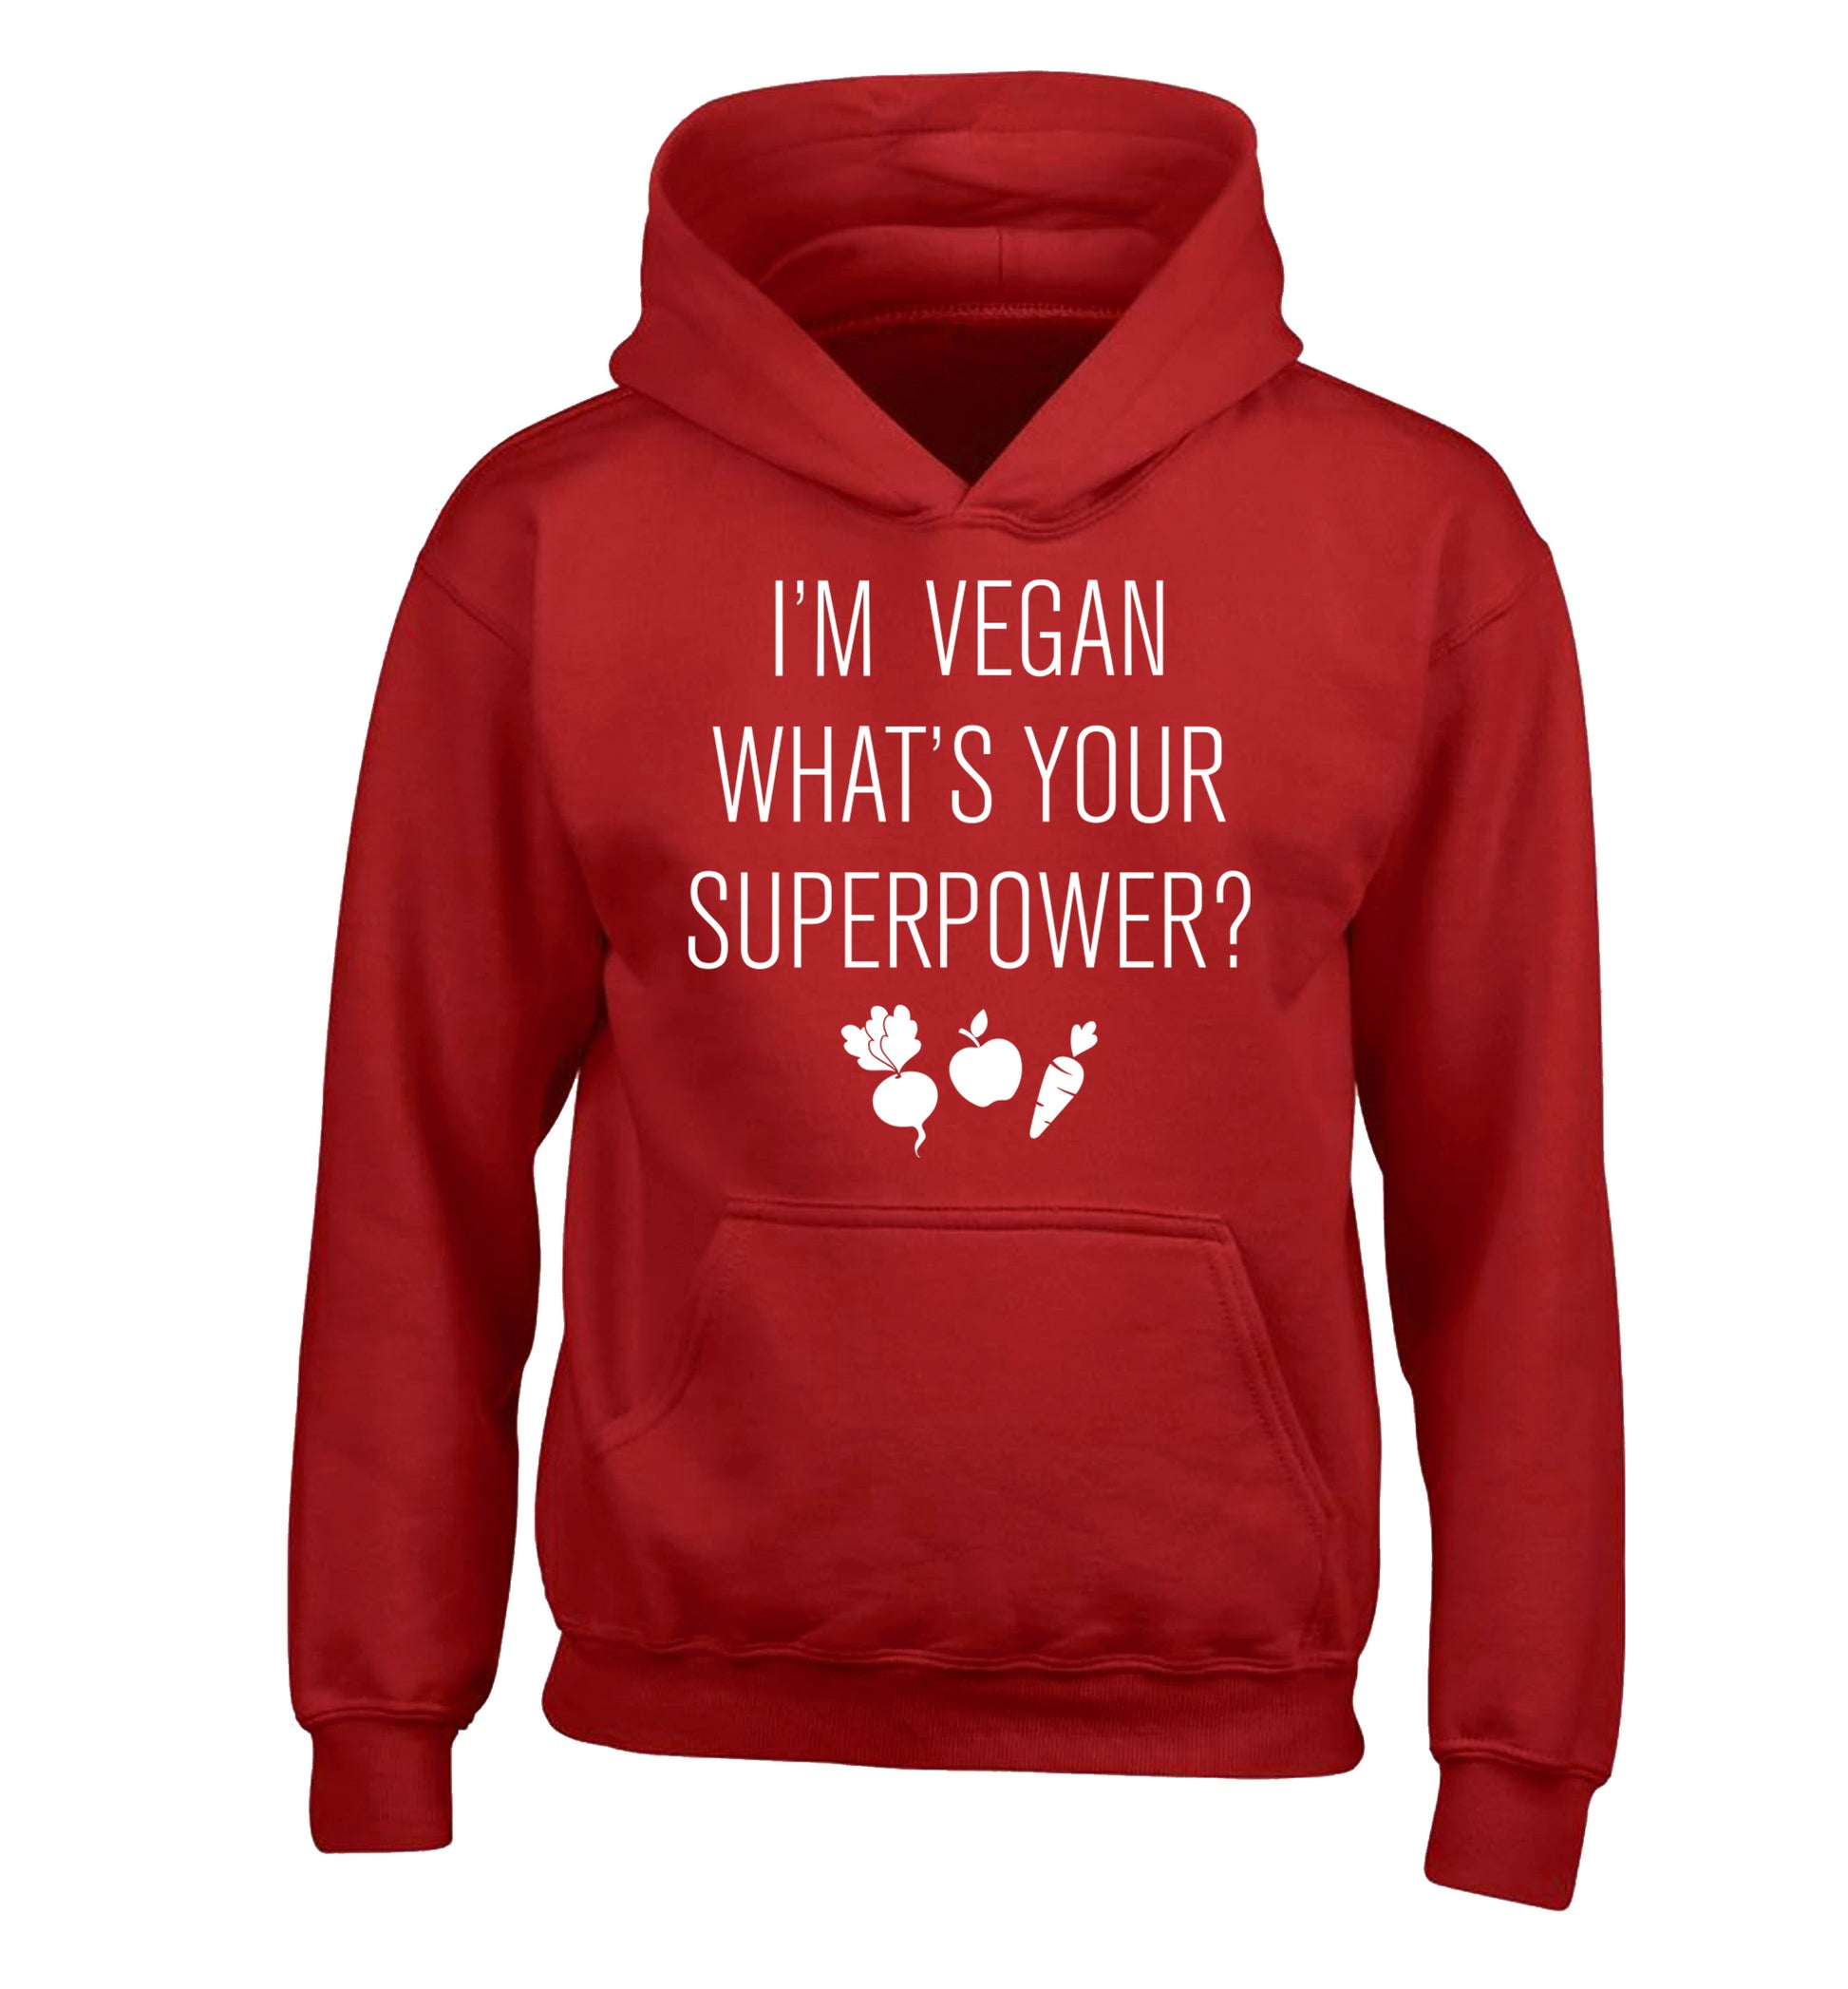 I'm Vegan What's Your Superpower? children's red hoodie 12-13 Years